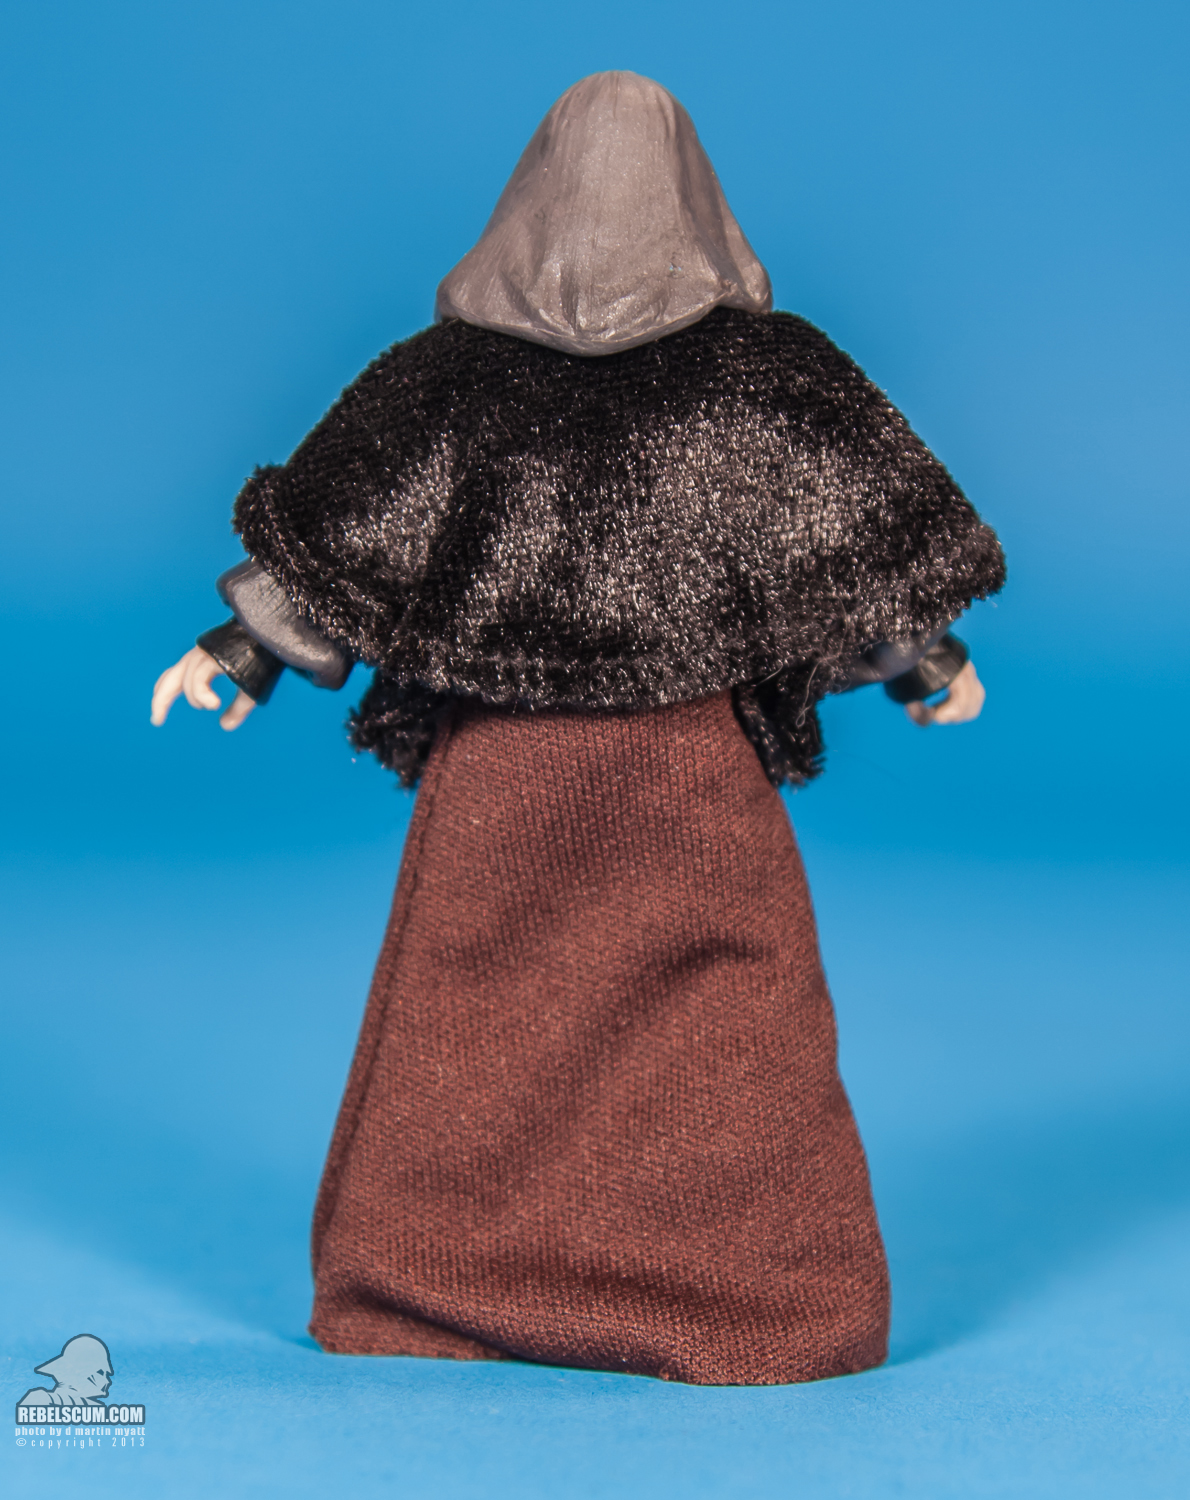 Darth_Sidious_Vintage_Collection_TVC_VC12-04.jpg